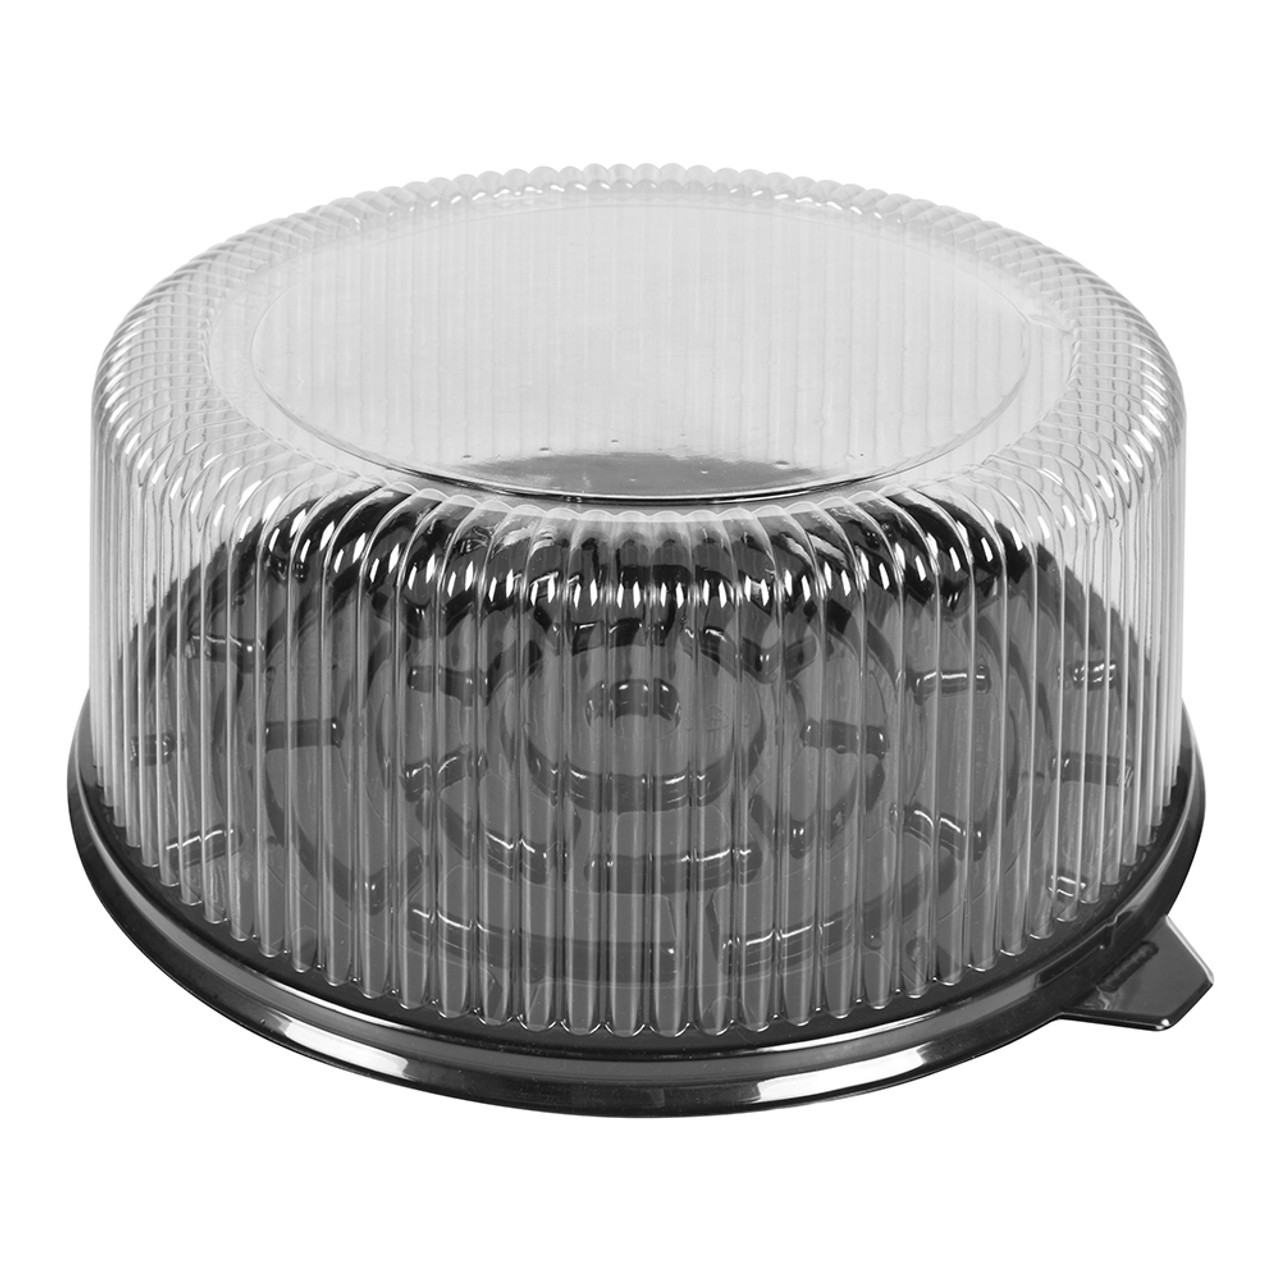 10-11 Plastic Disposable Cake Containers Carriers with Dome Lids